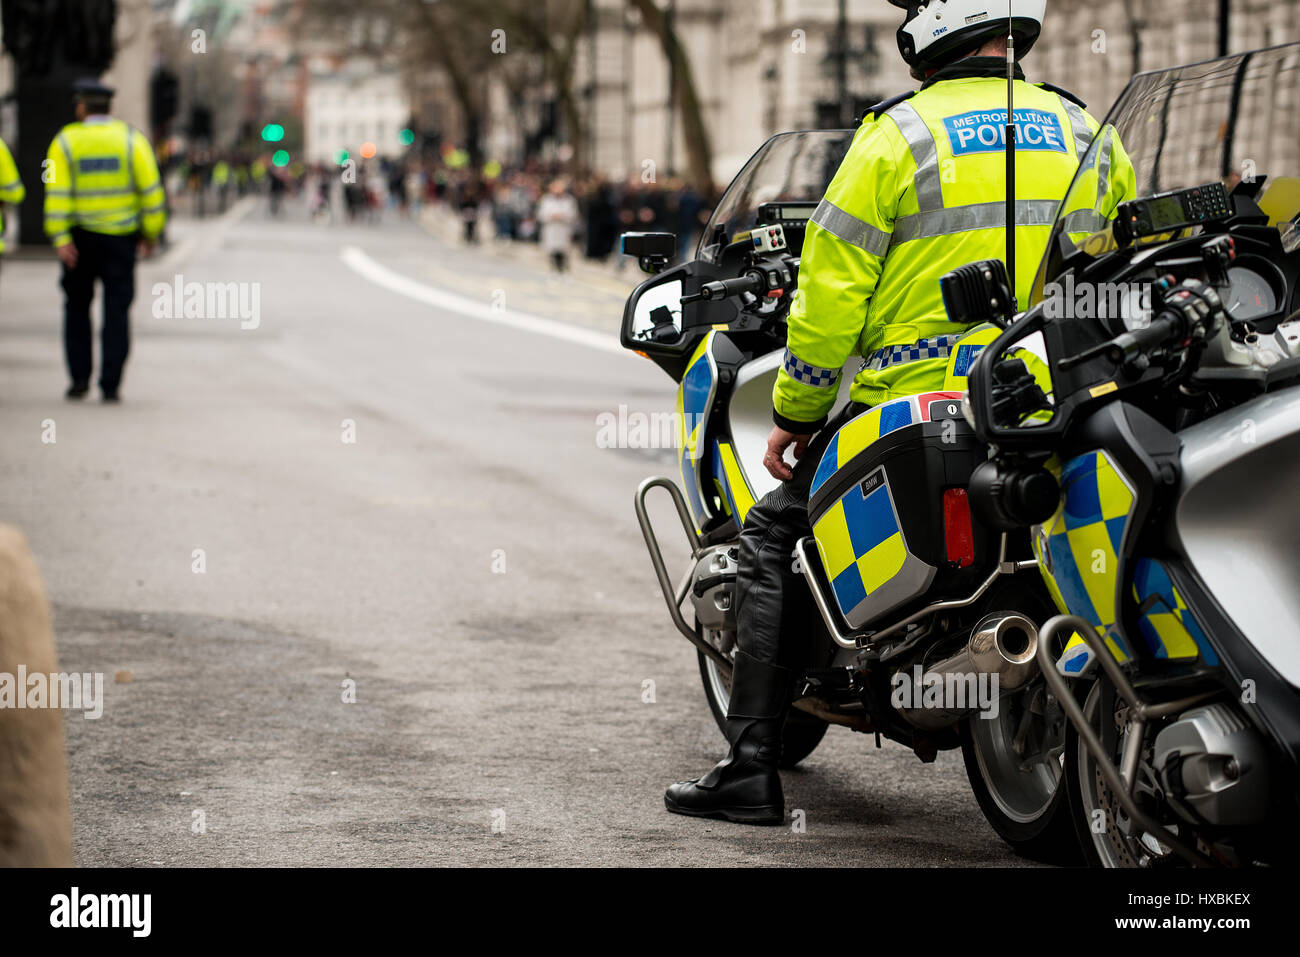 Metropolitan Police officers on motorbikes to ensure public safety and control traffic during a large protest demonstration, in central London,UK. Stock Photo